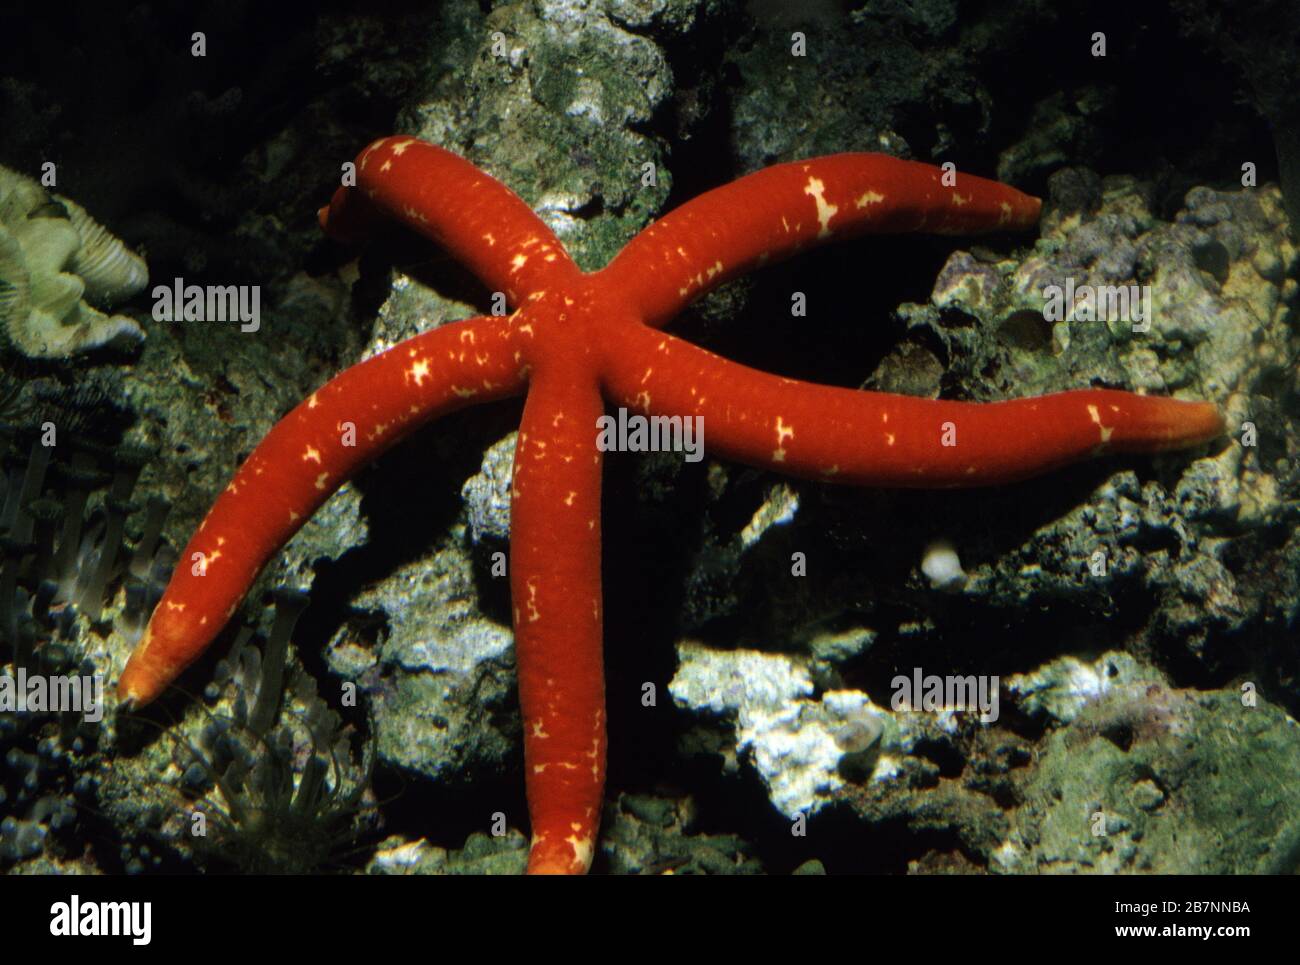 Spotted red sea star, Linckia multifora Stock Photo